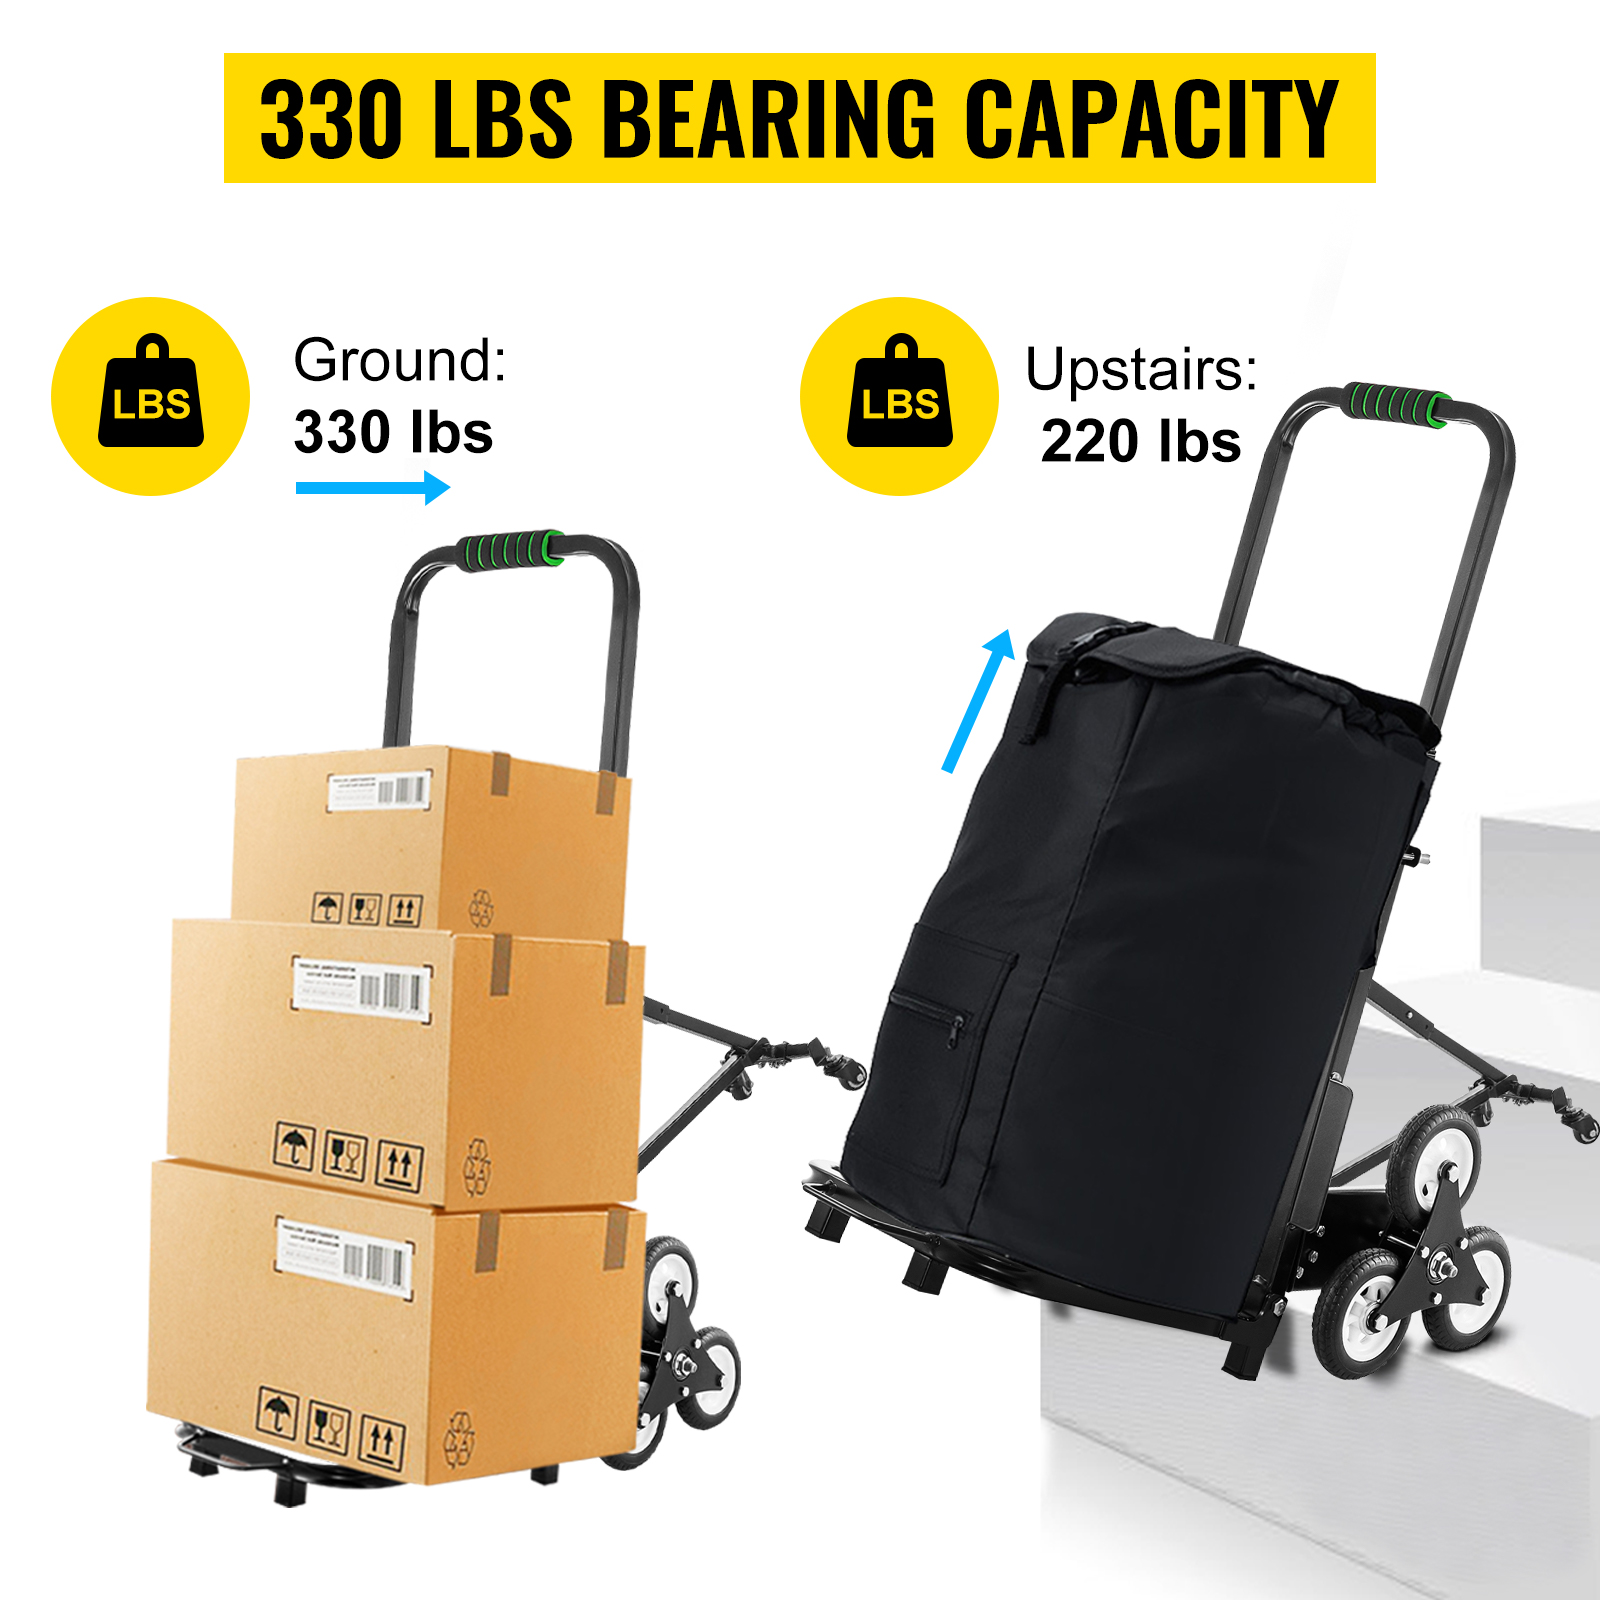 Details about   Luggage Stair Climber Hand Truck Cart Transport Trolley Heavy Duty Foldable c 03 